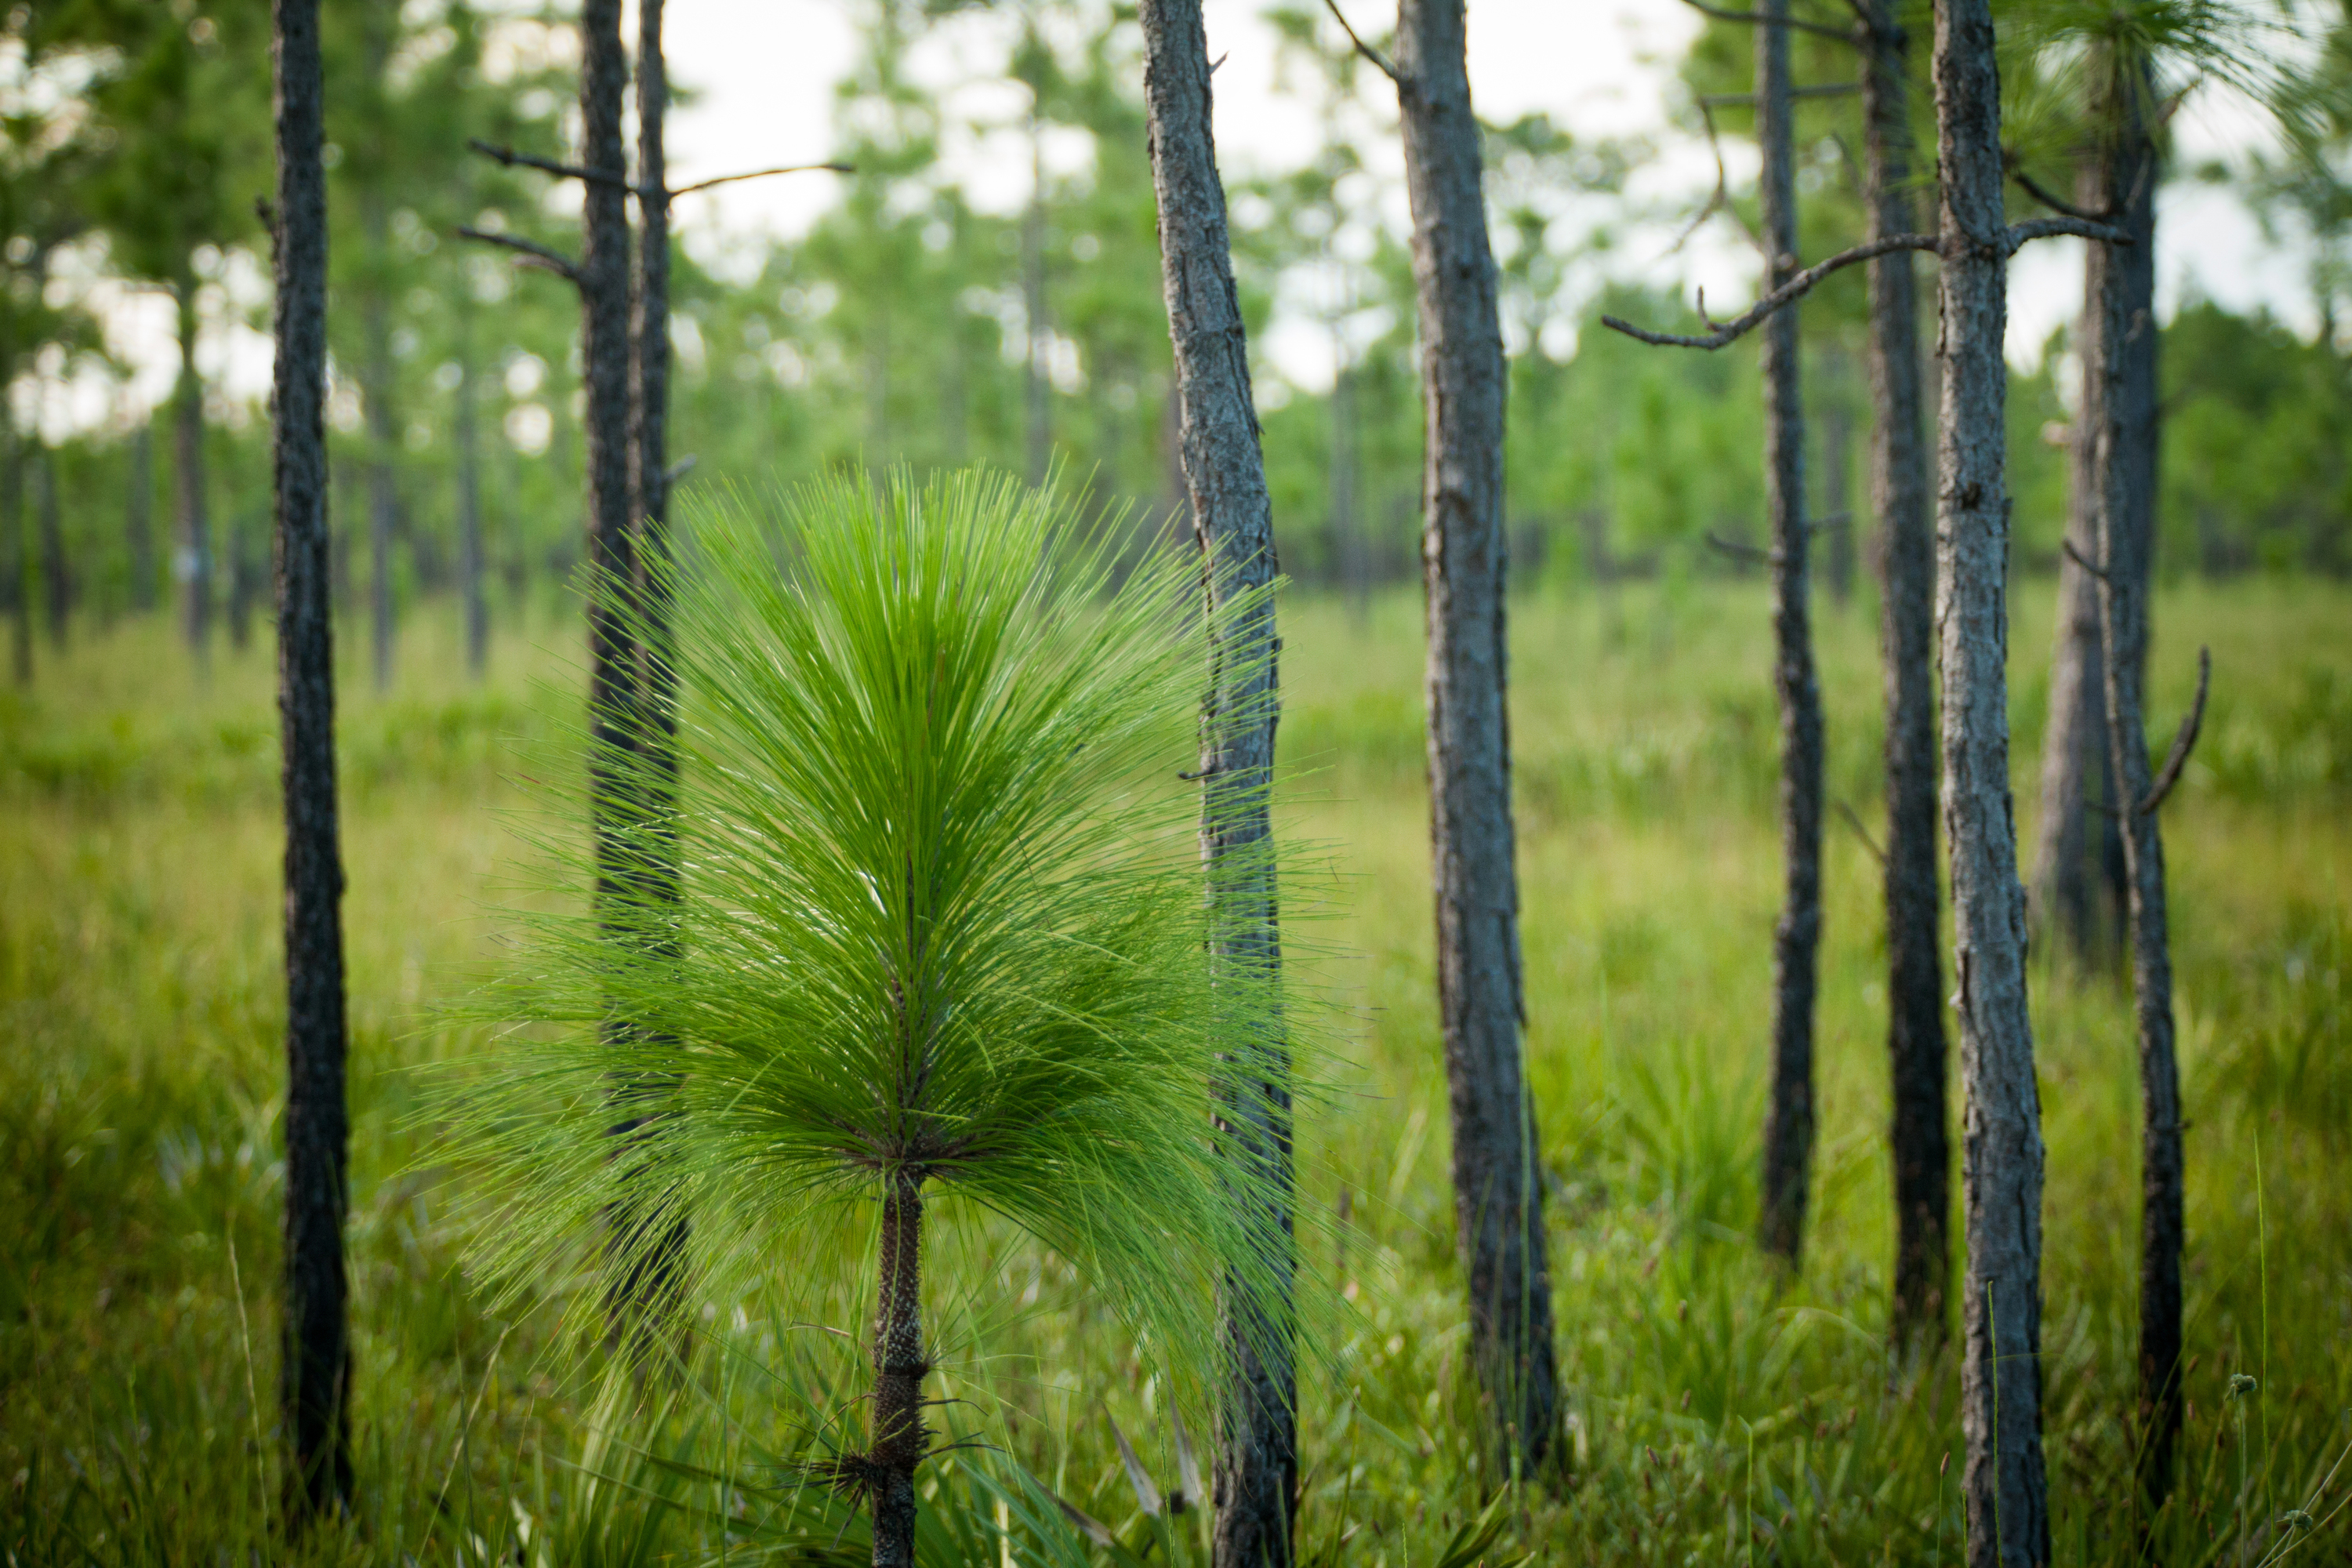 Longleaf pine trees at Apalachicola Bluffs and Ravines Preserve. 